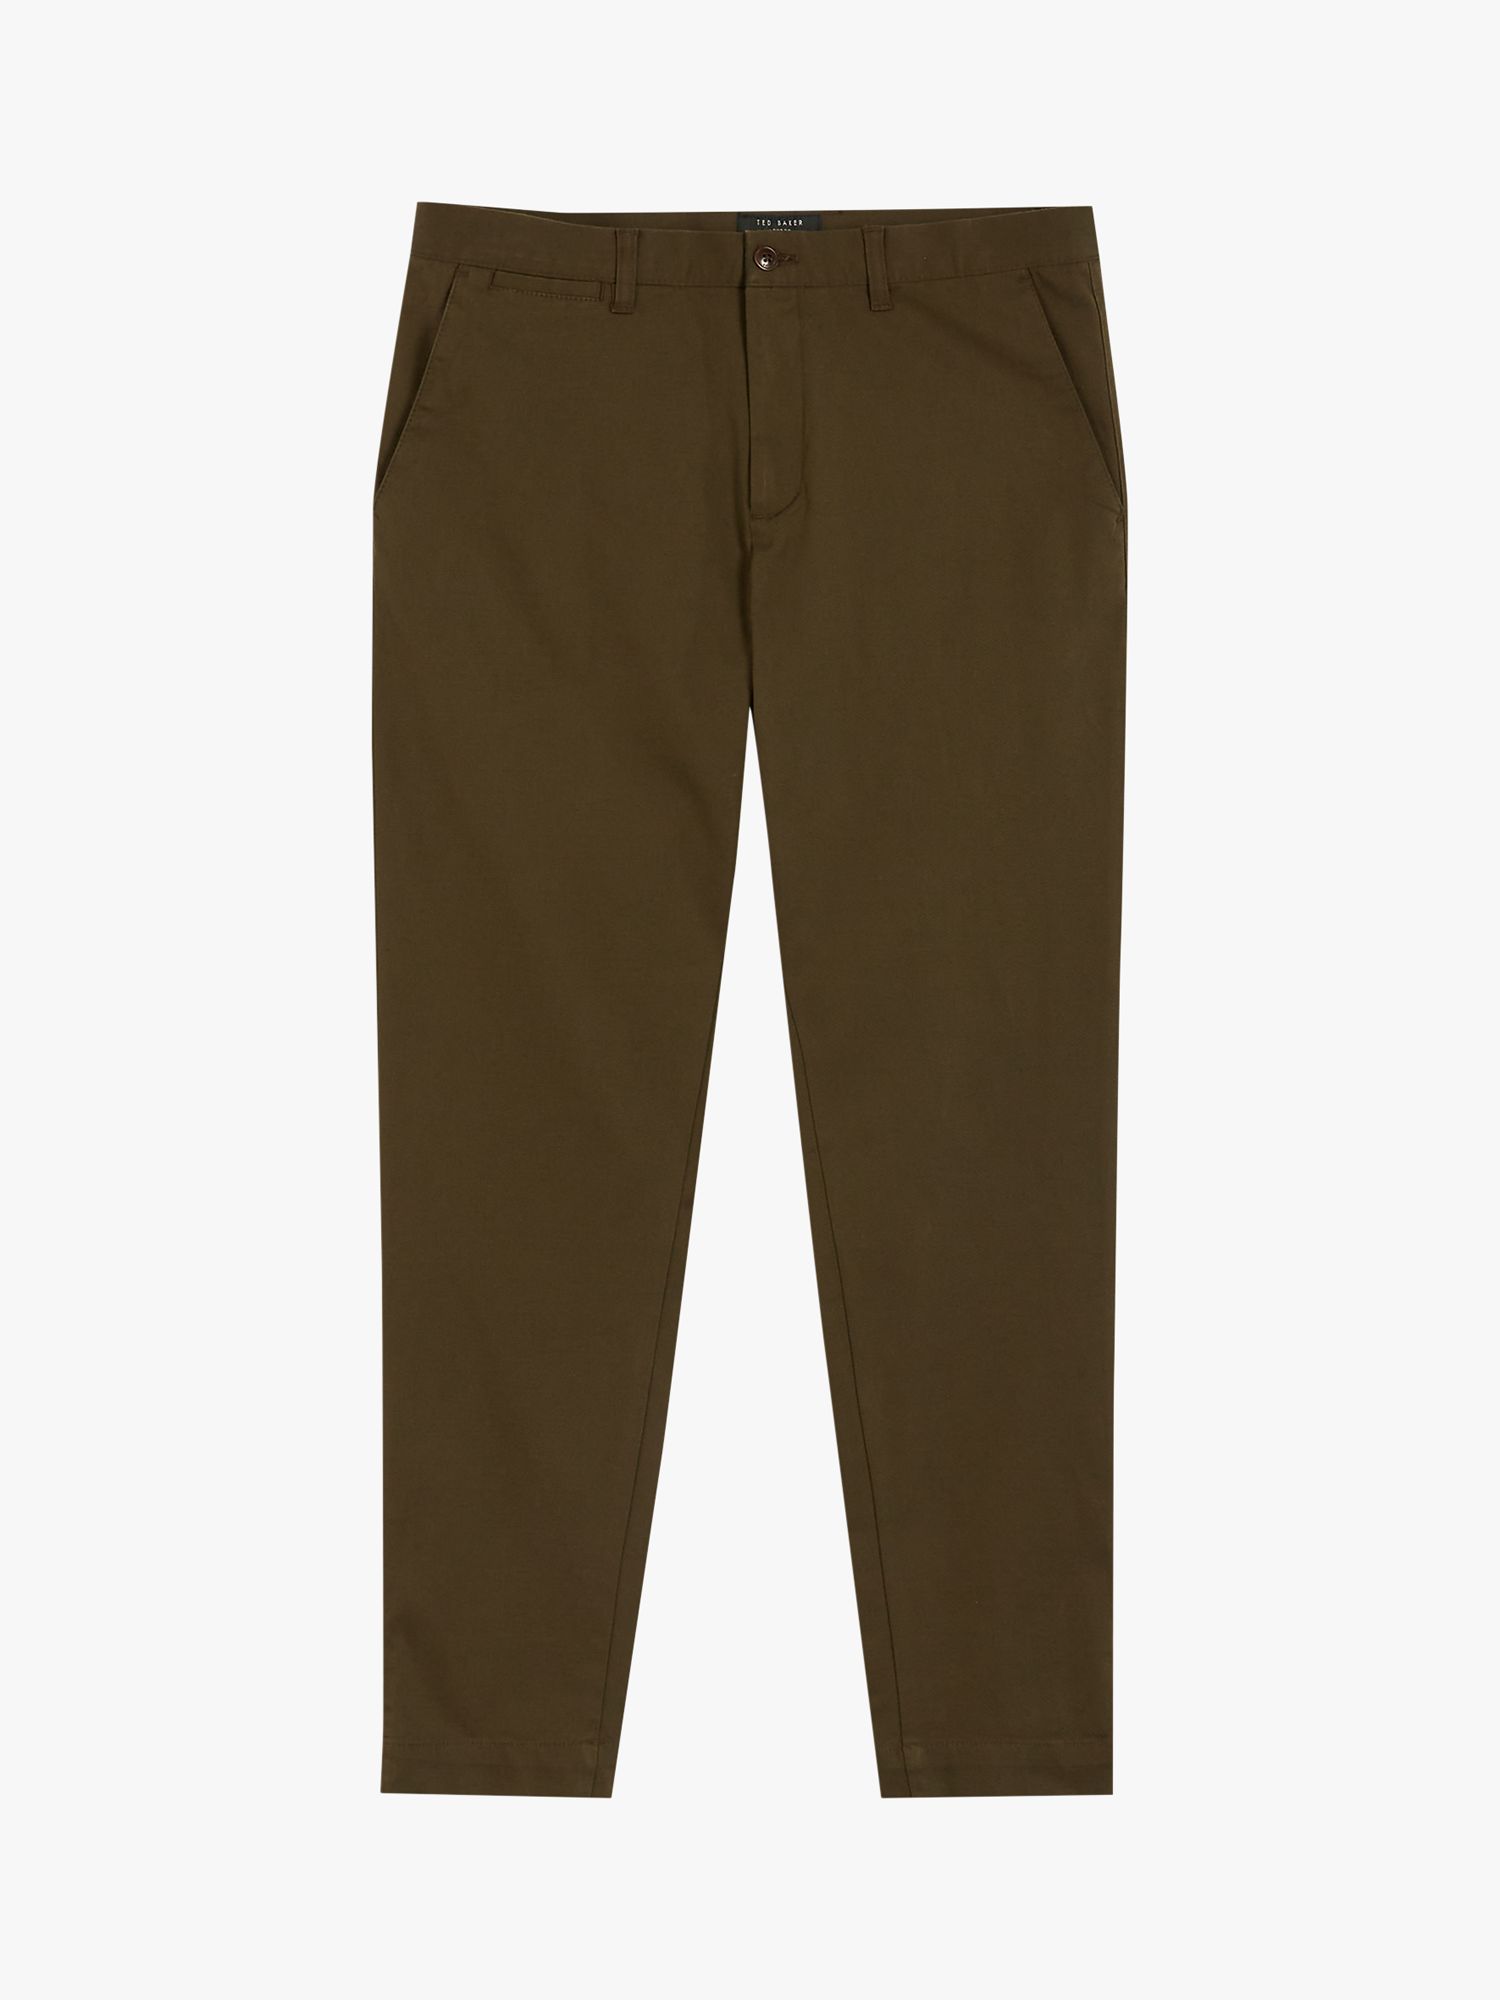 Ted Baker Genbee Cotton Lyocell Chinos, Khaki, 36R